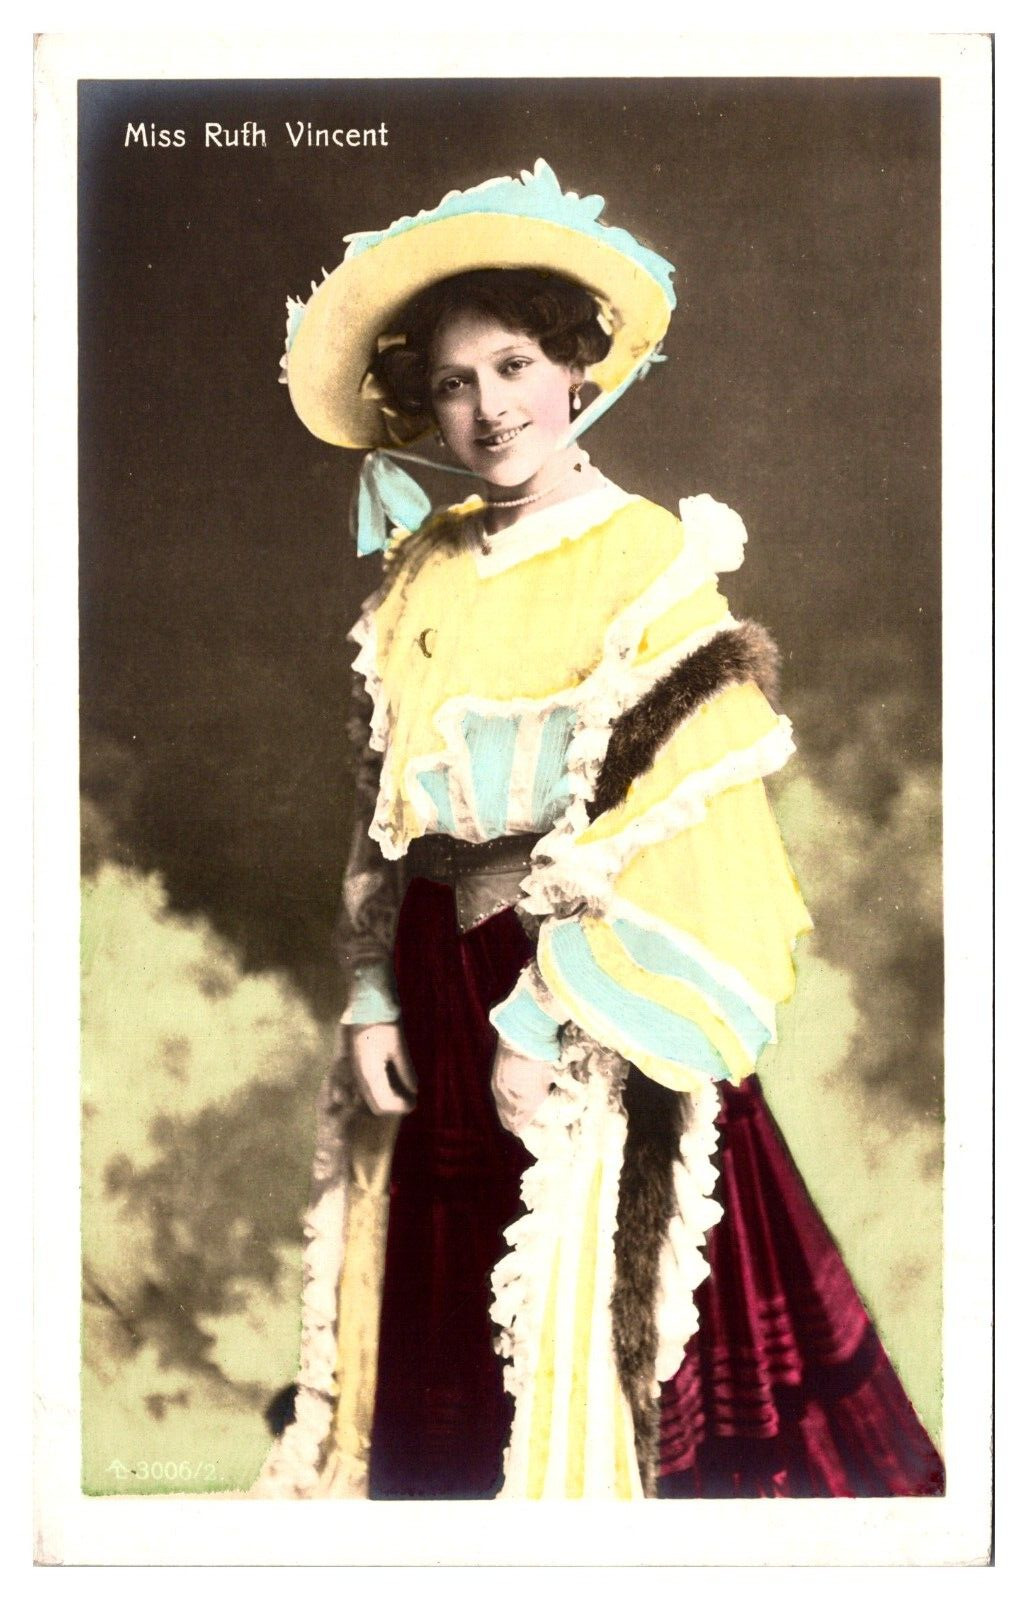 Antique Miss Ruth Vincent, English Opera Singer and Actress, Postcard